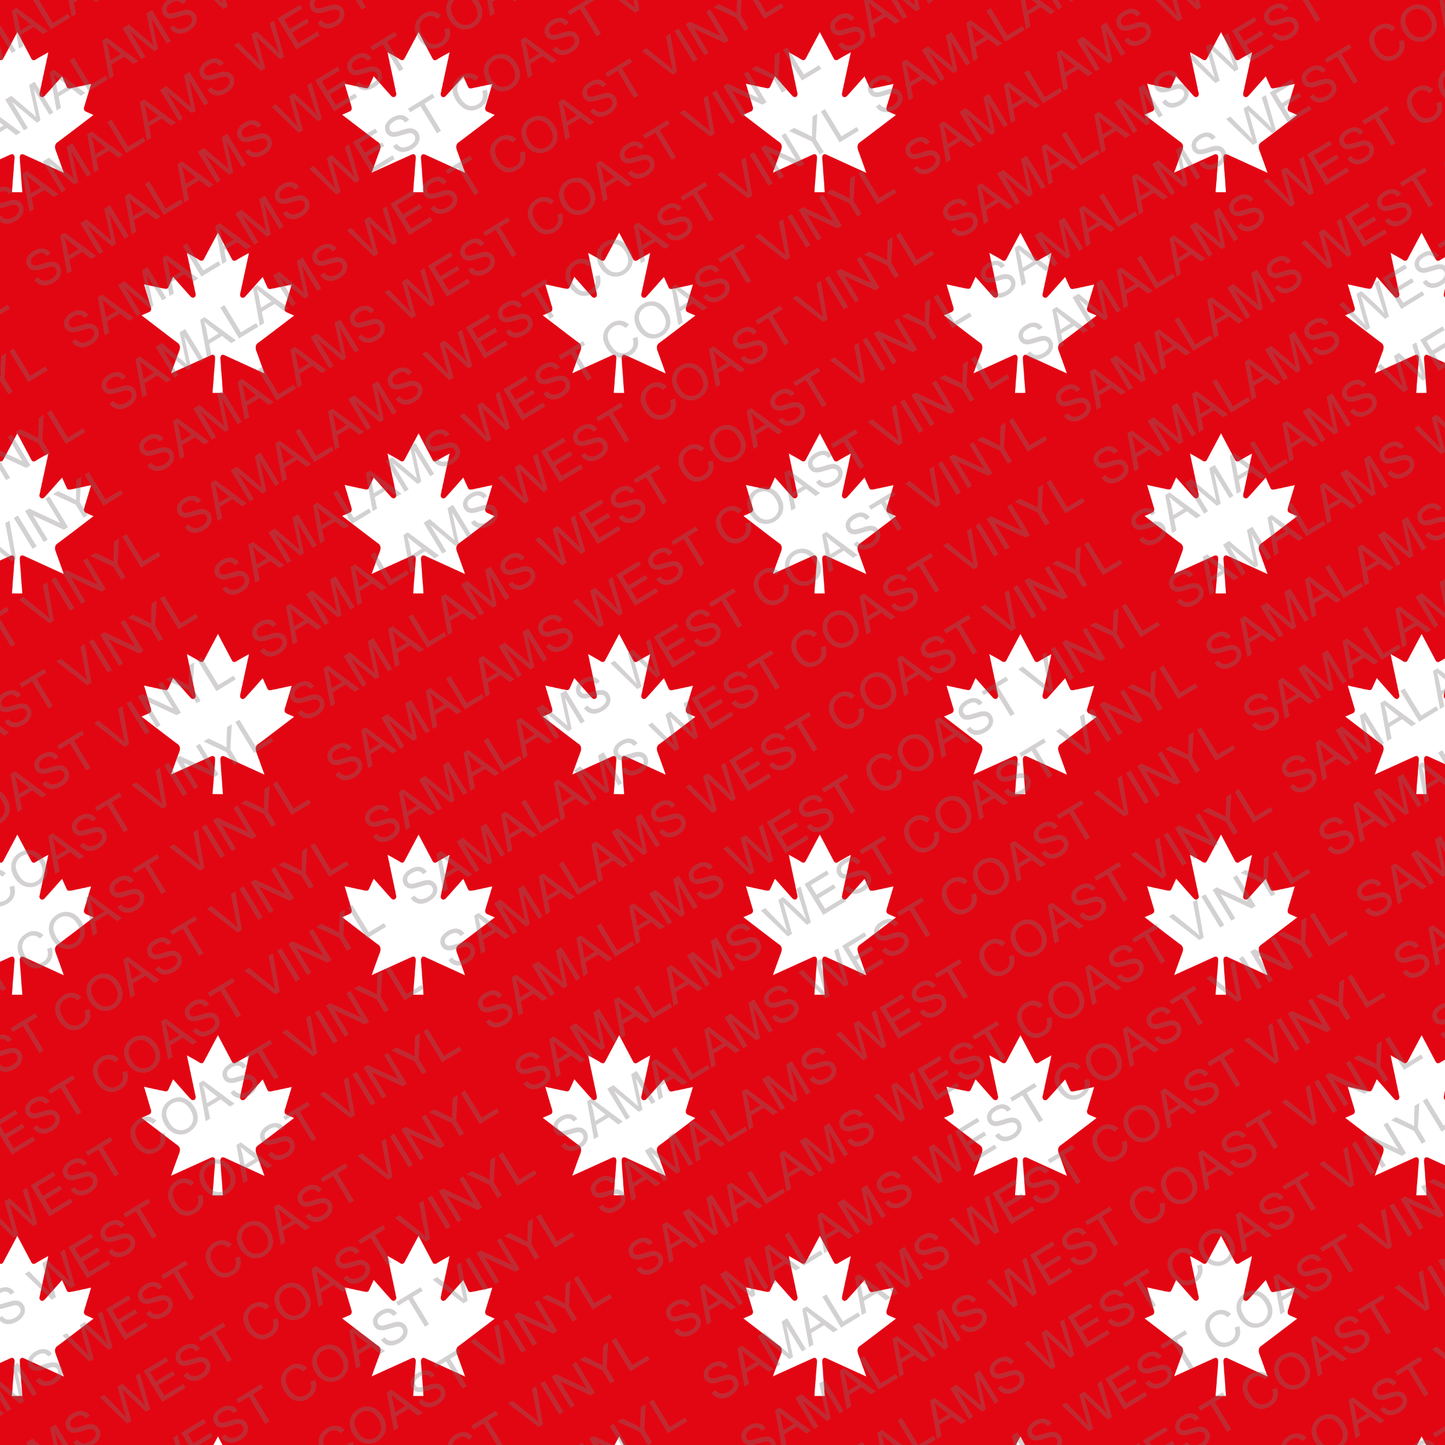 Canada Day - Pack 1 (Not Seamless)